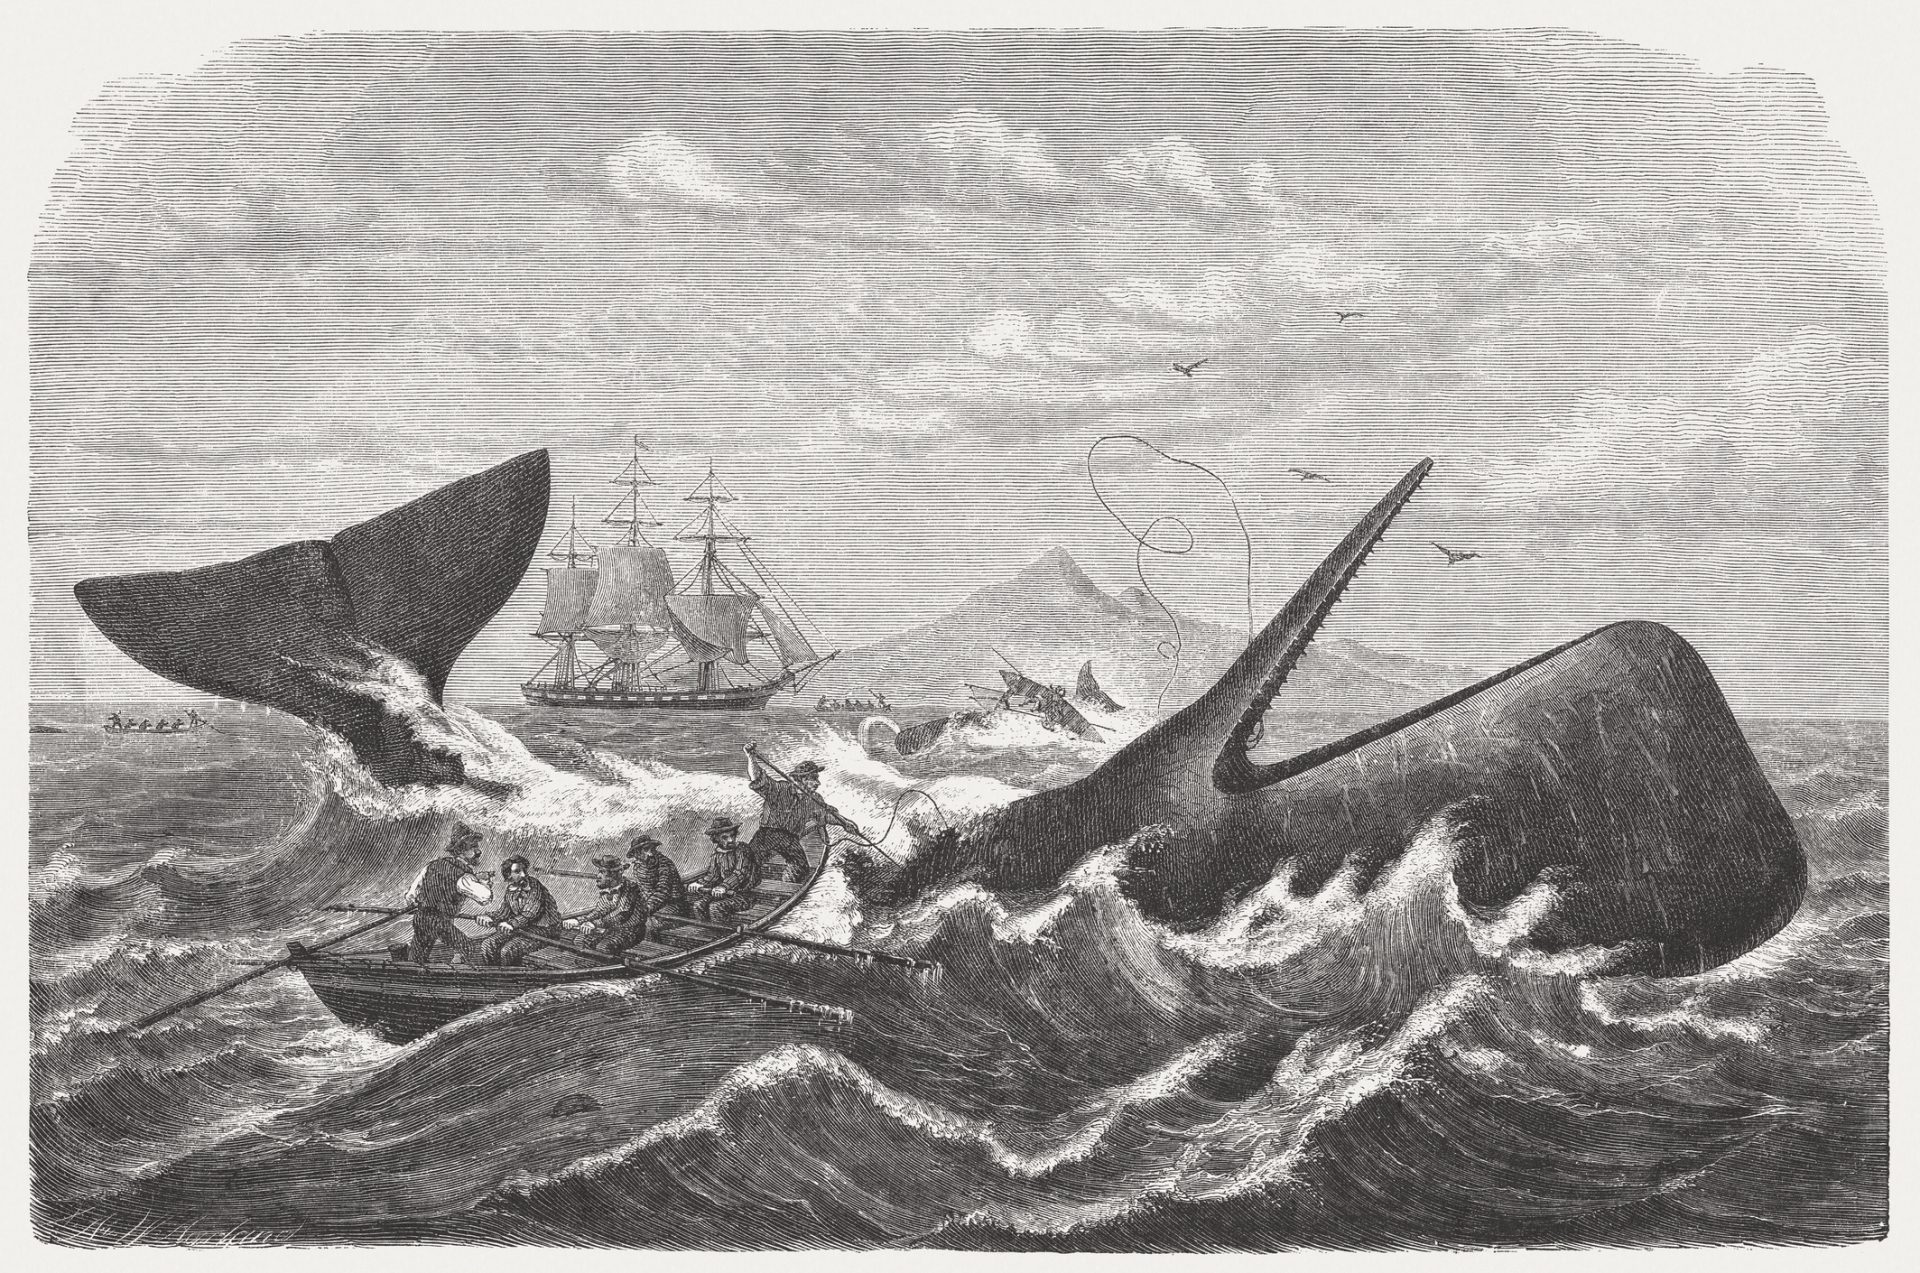 In this 1869 illustration, whalers are seen in action, bringing to mind the novel "Moby-Dick," published 18 years earlier. Herman Melville's Captain Ahab obsessively pursued the white whale, just as some politicians try repeatedly to reform Pennsylvania’s use of property taxes to fund schools.